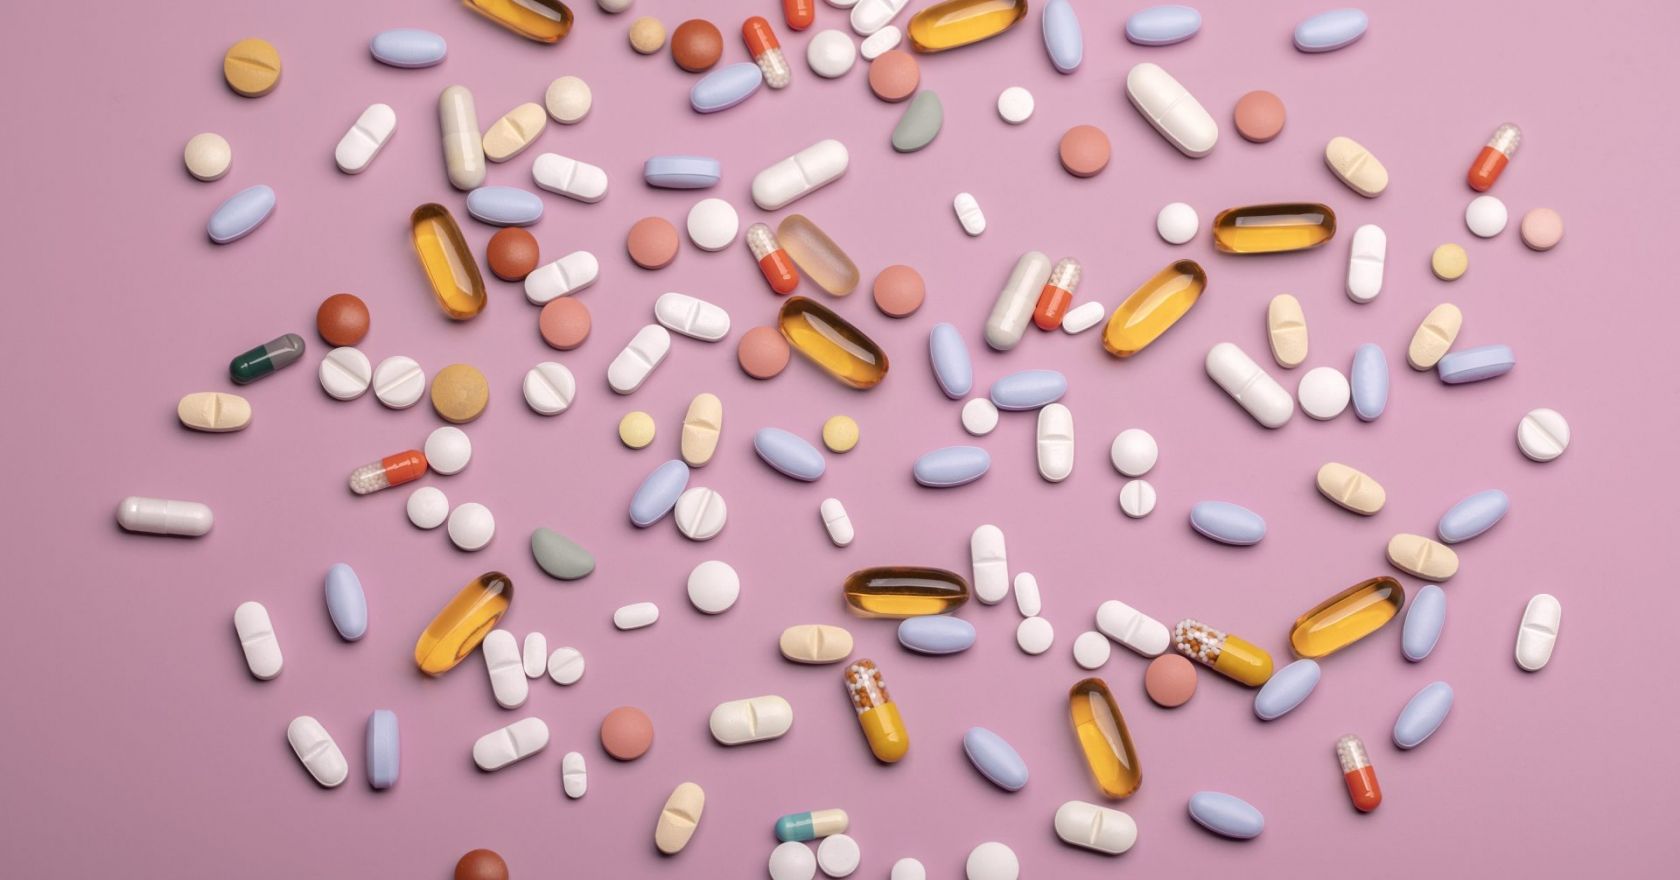 Vitamin supplements: where to buy them and why we need them